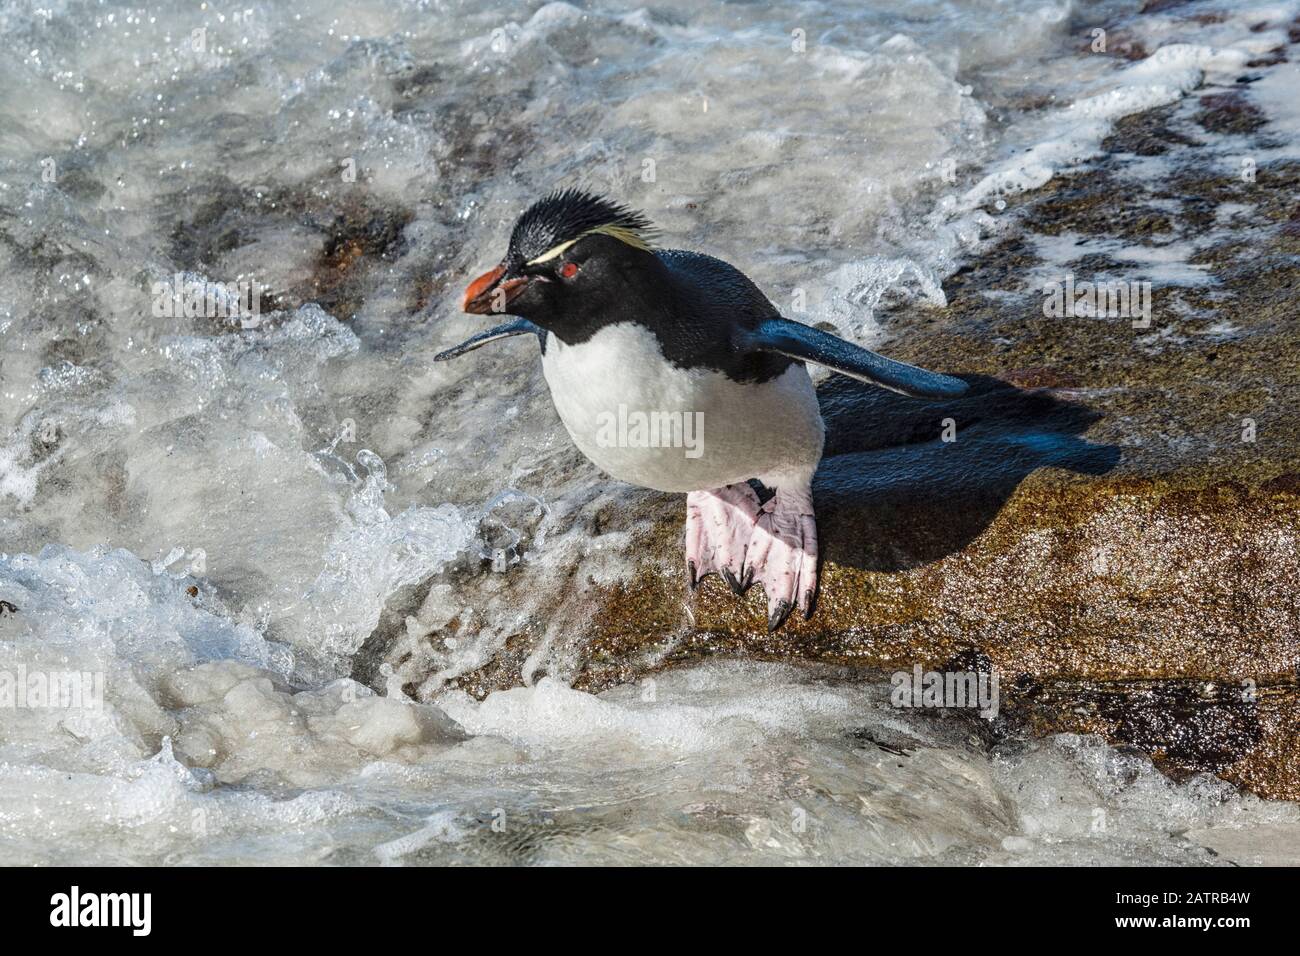 Southern Rockhopper Penguin, Eudyptes (chrysocome) chrysocome, standing on the coast of Saunders Island, Falkland Islands, South Atlantic Ocean Stock Photo